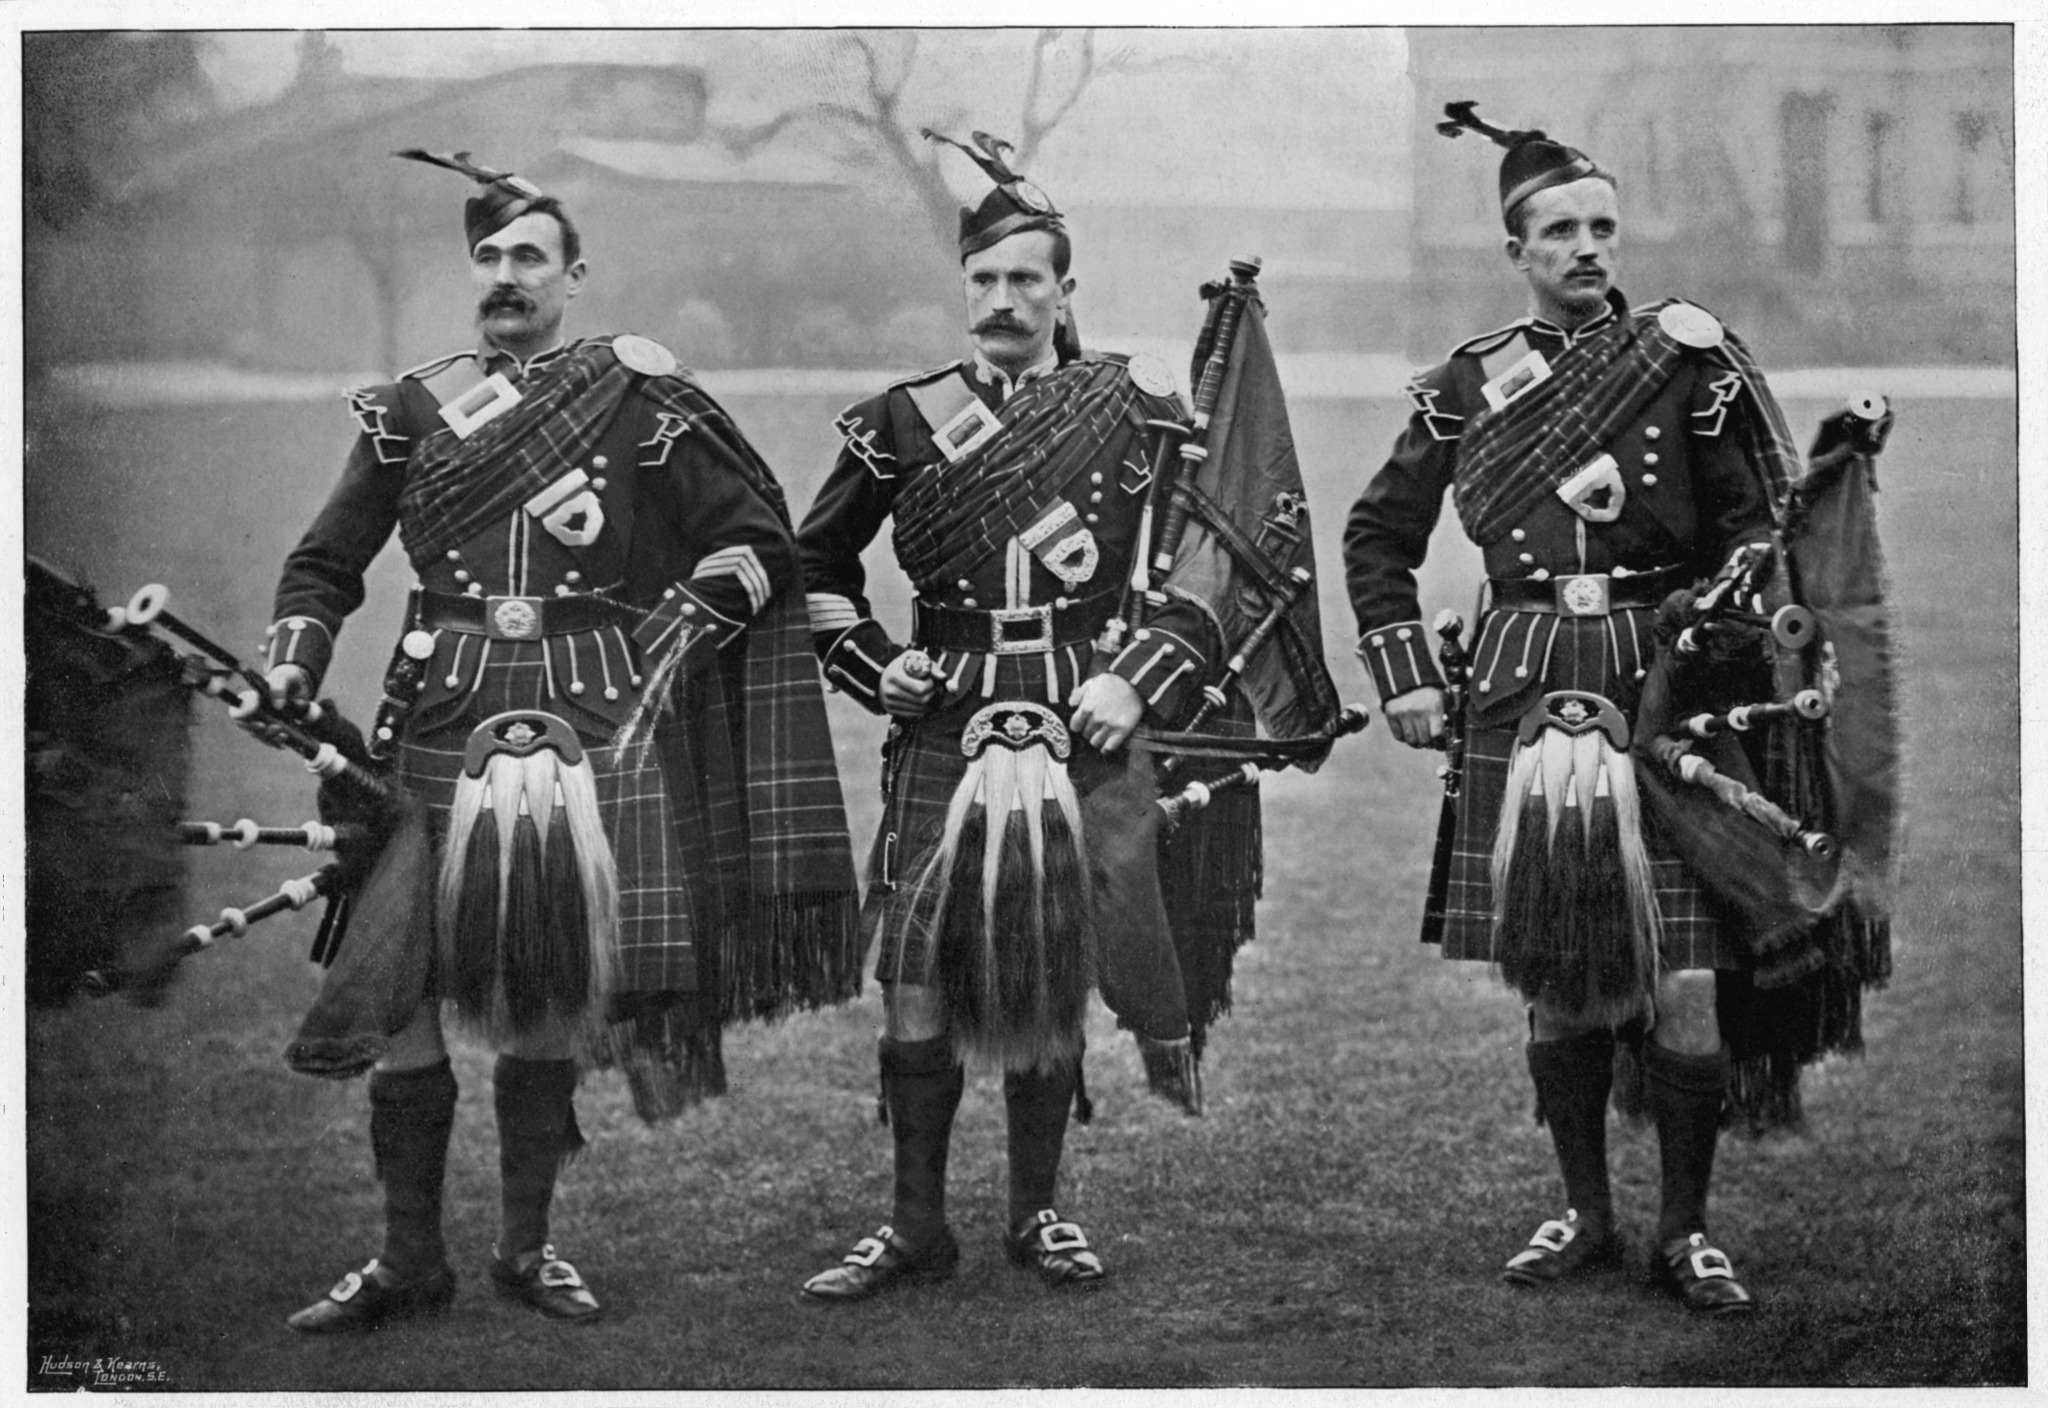 Three men in a black and white historical photo wearing sporrans and bagpipes.